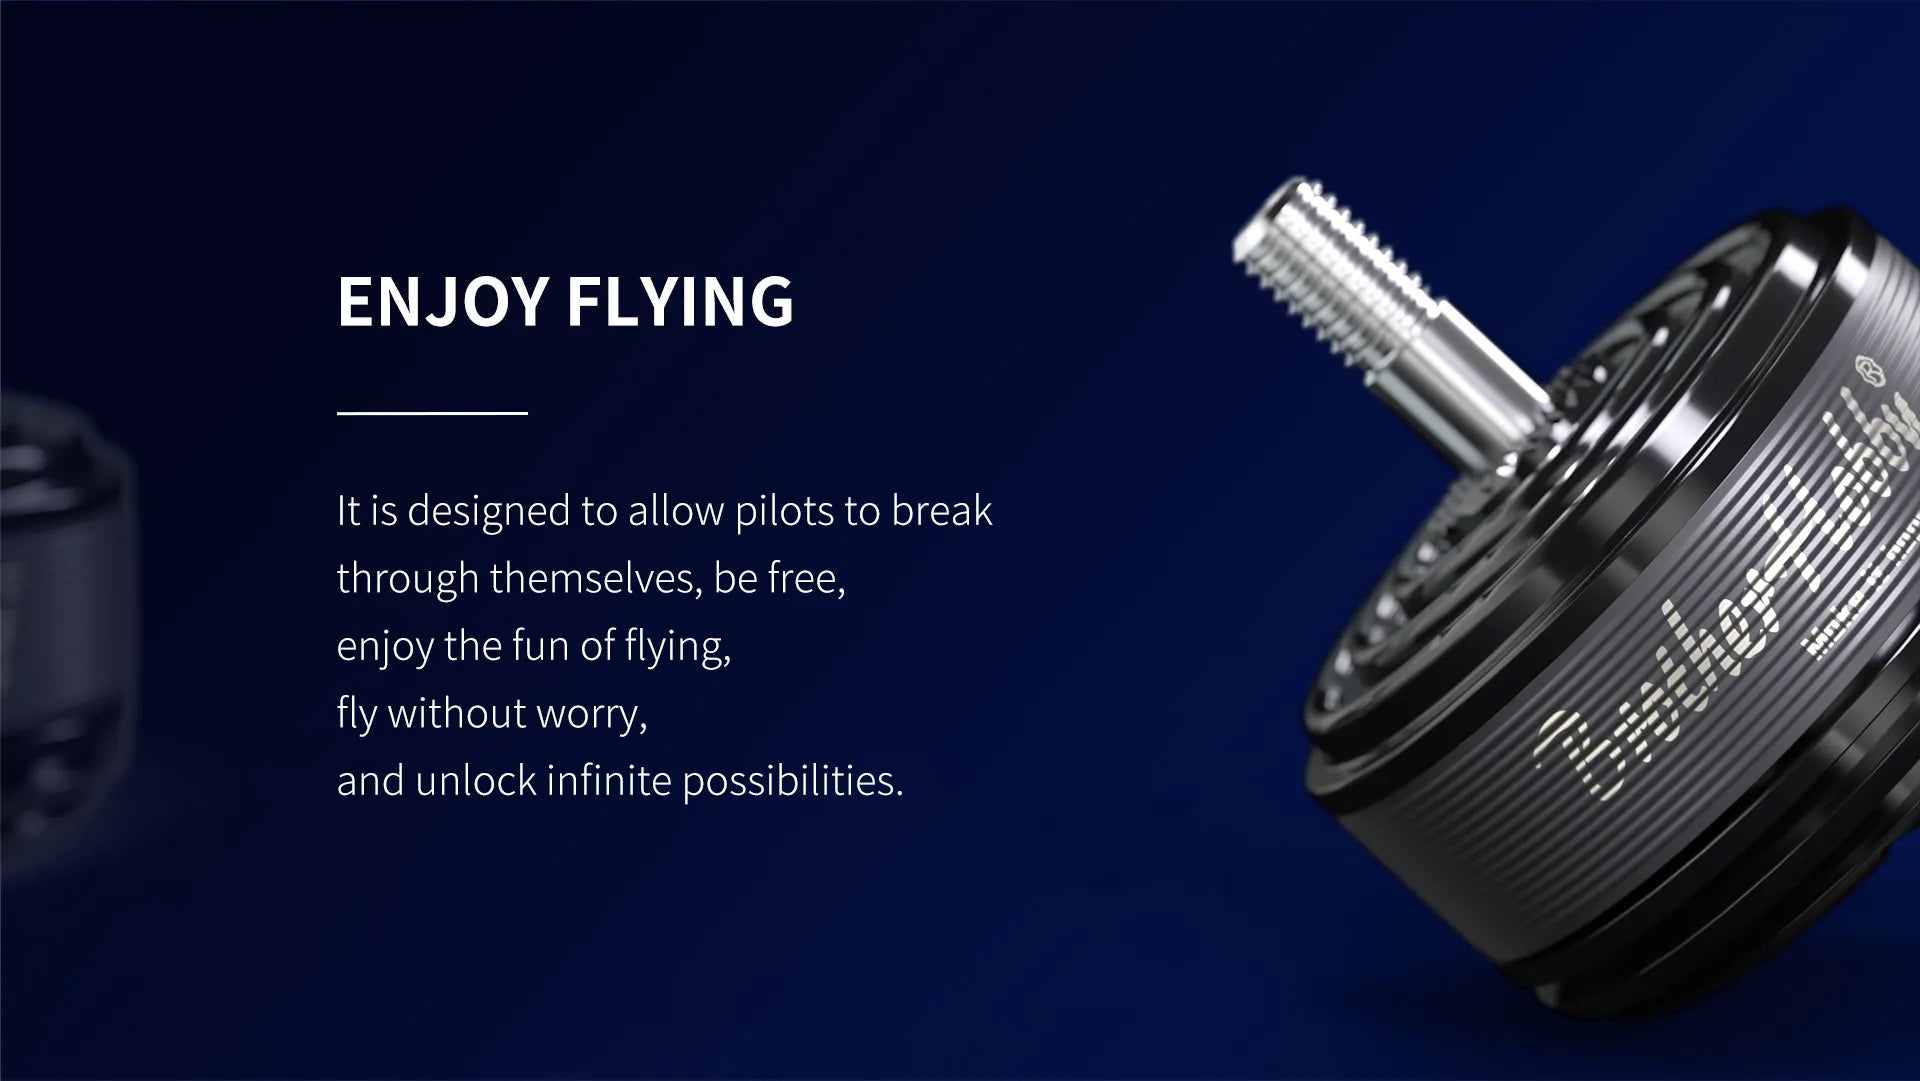 designed to allow pilots to break through themselves, be free, enjoy the fun of flying 